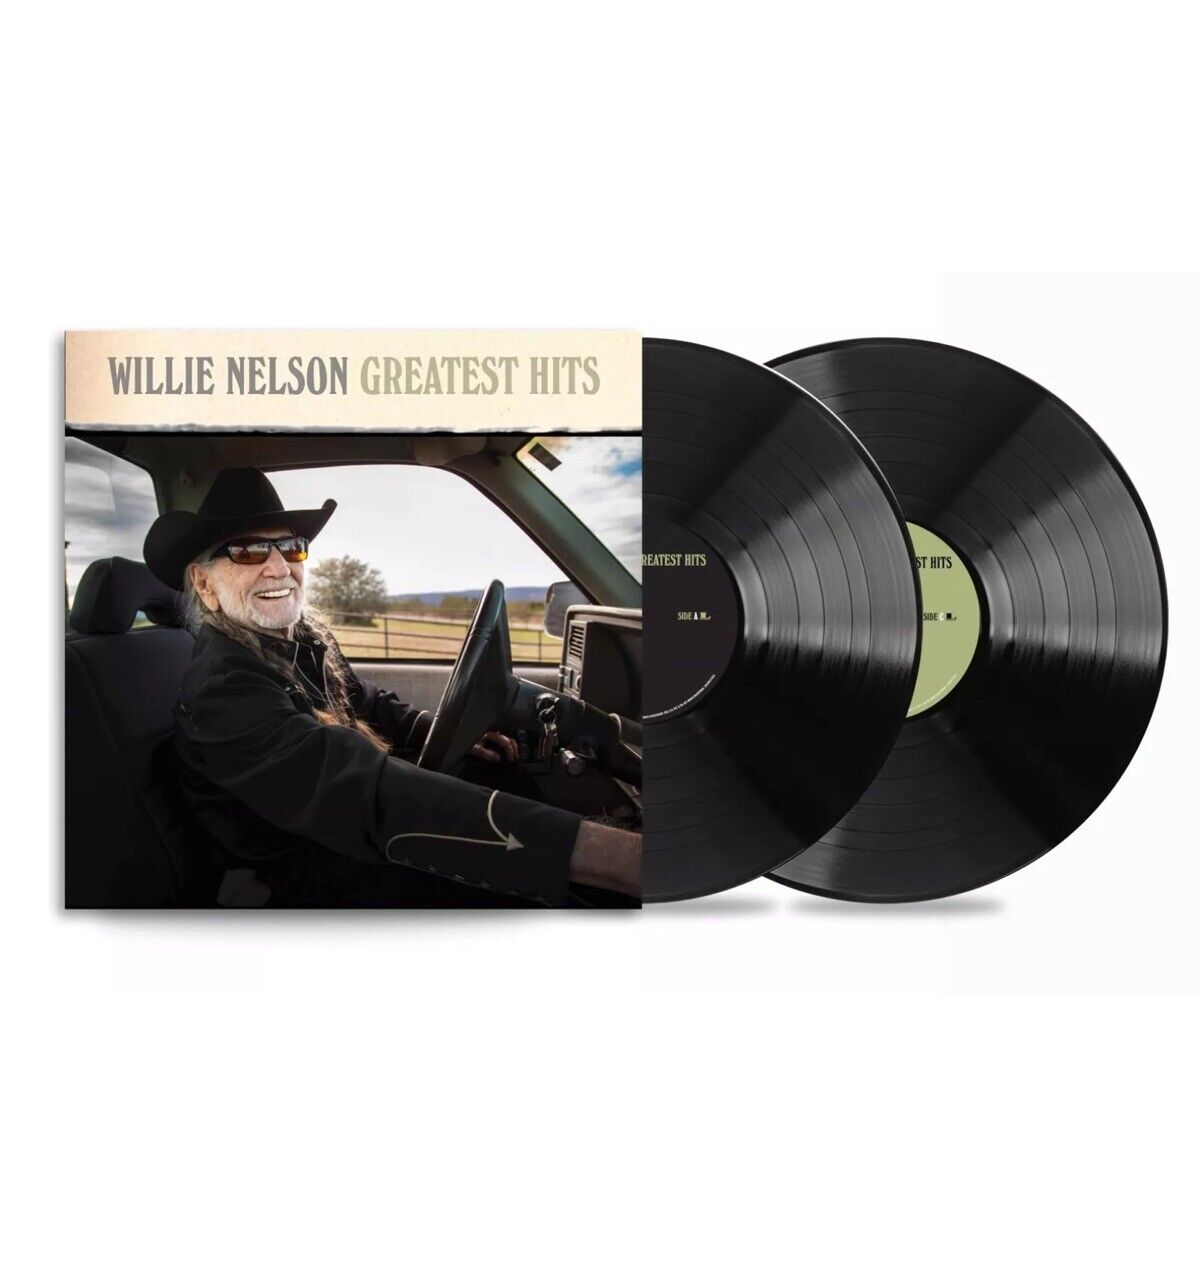 A196588131813 Willie Nelson - Greatest Hits Vinyl Record